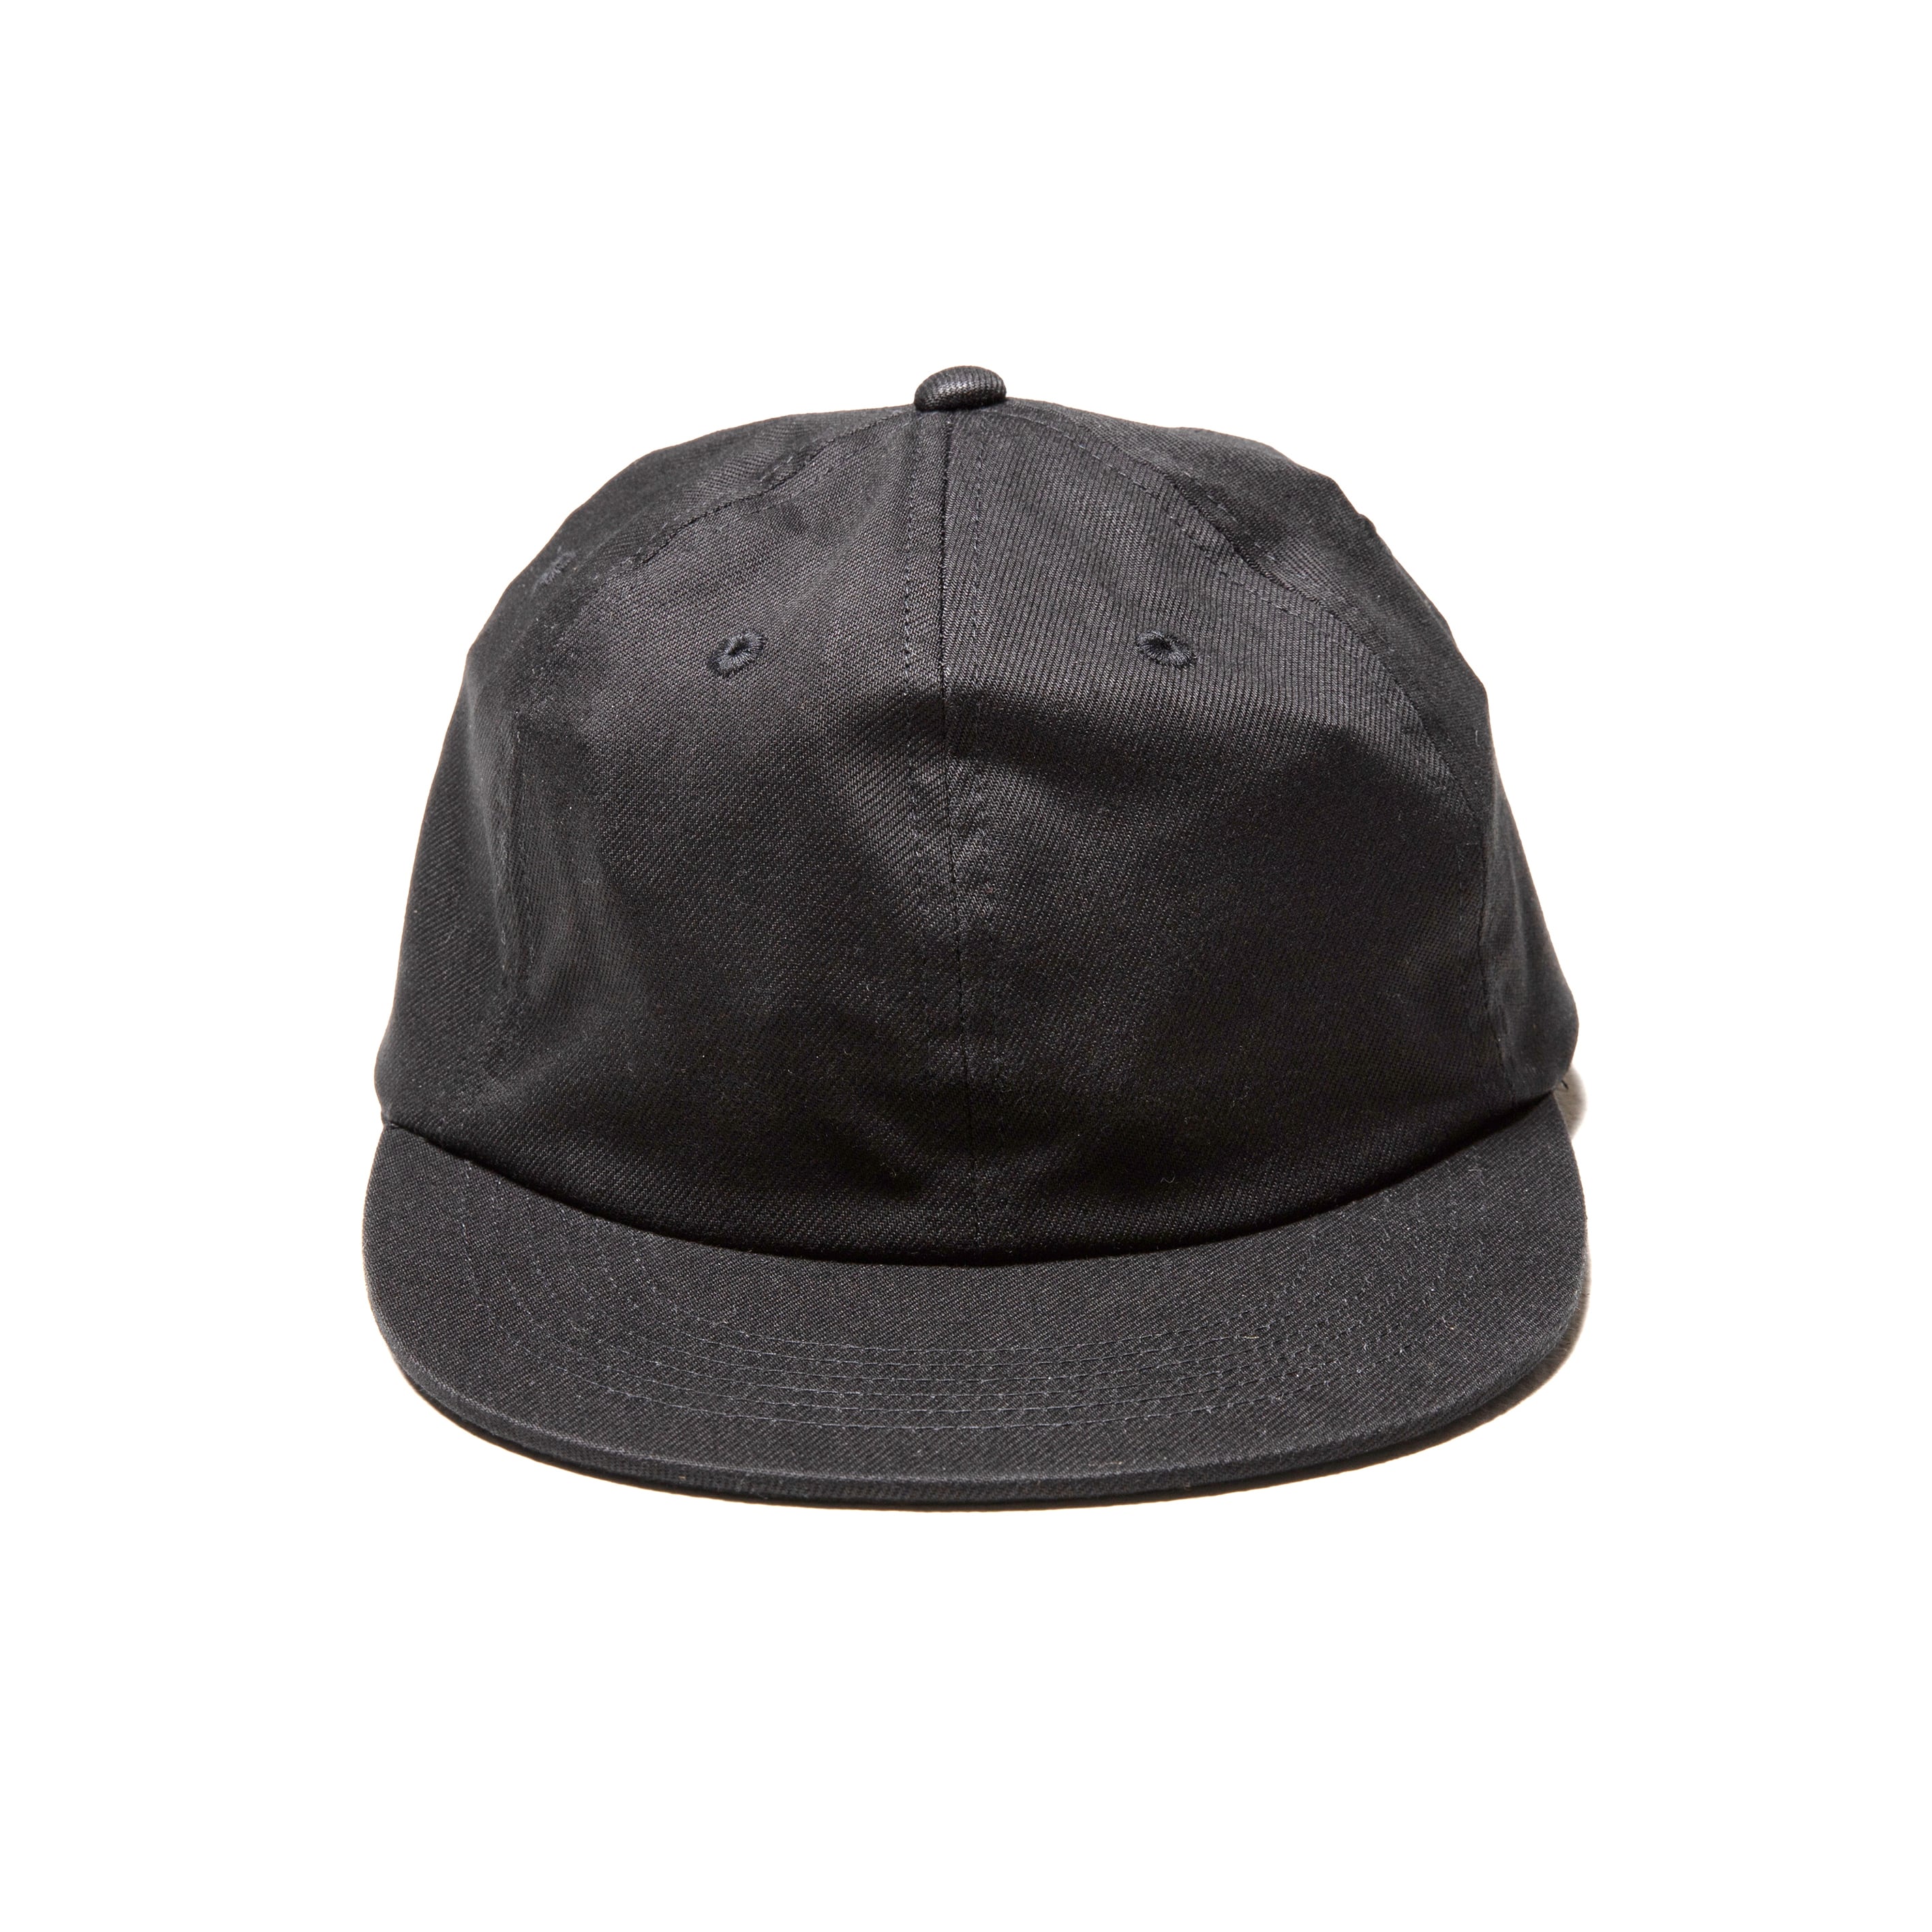 OVY Vintage French Drill 6 Panel Cap